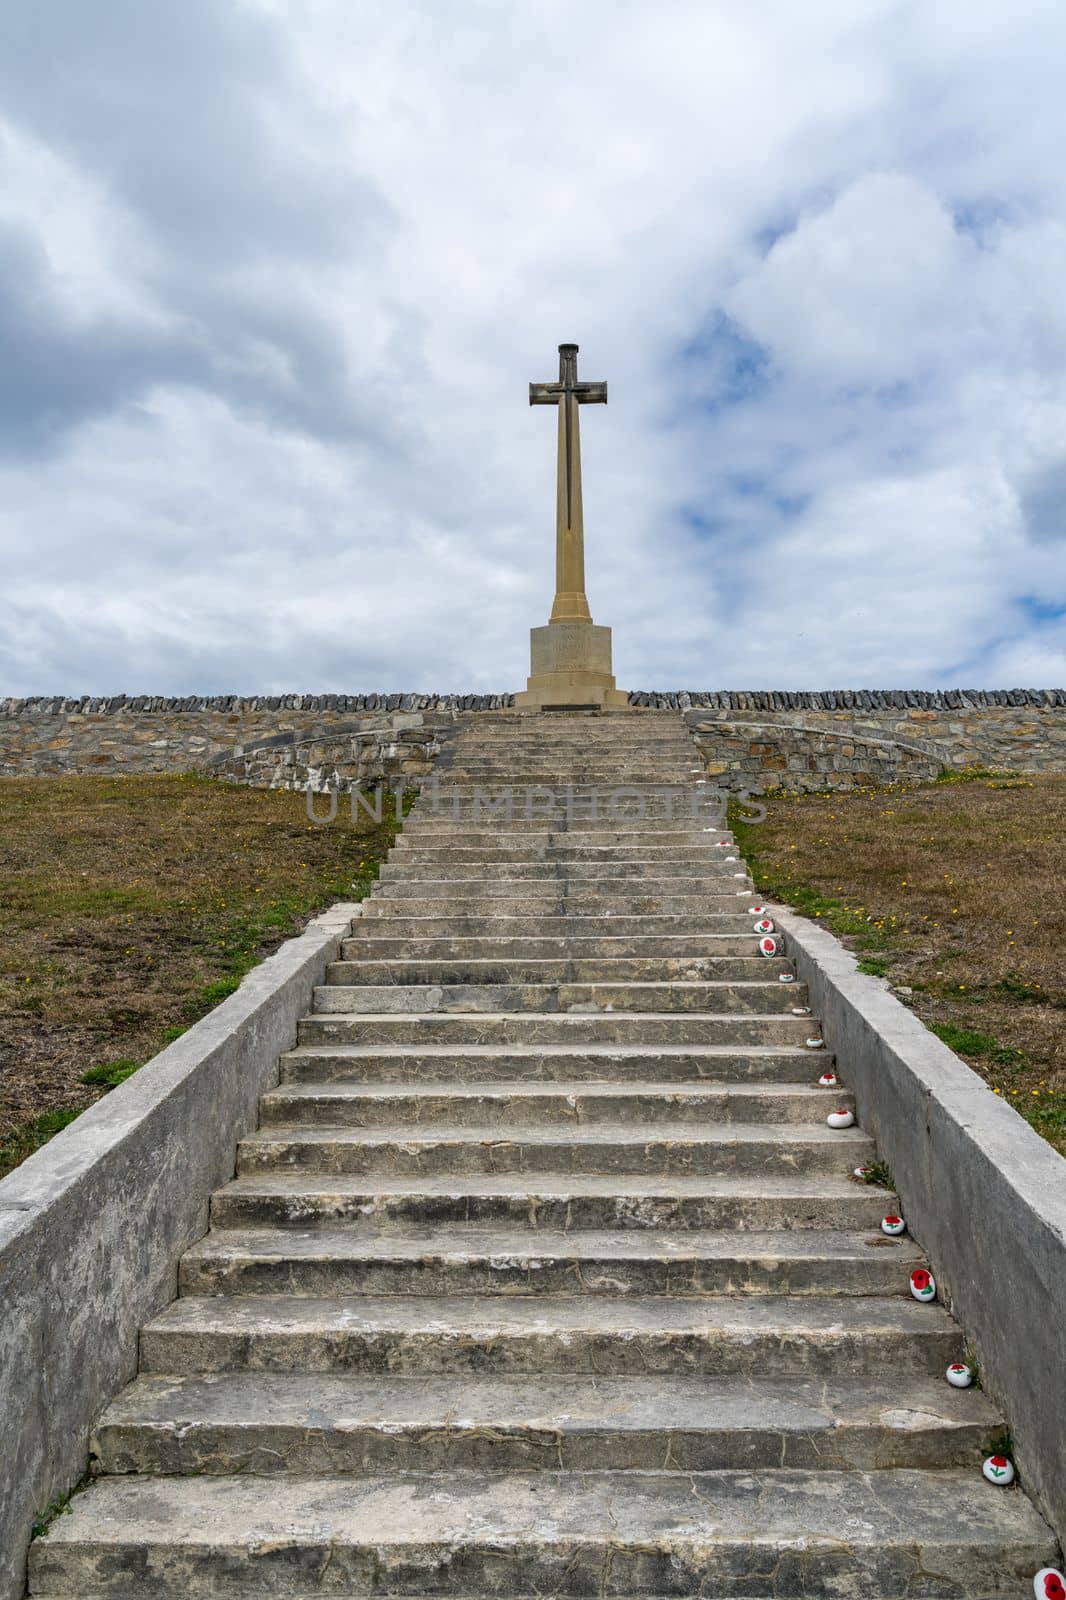 Memorial to deaths in Great War in Stanley Falkland Islands by steheap